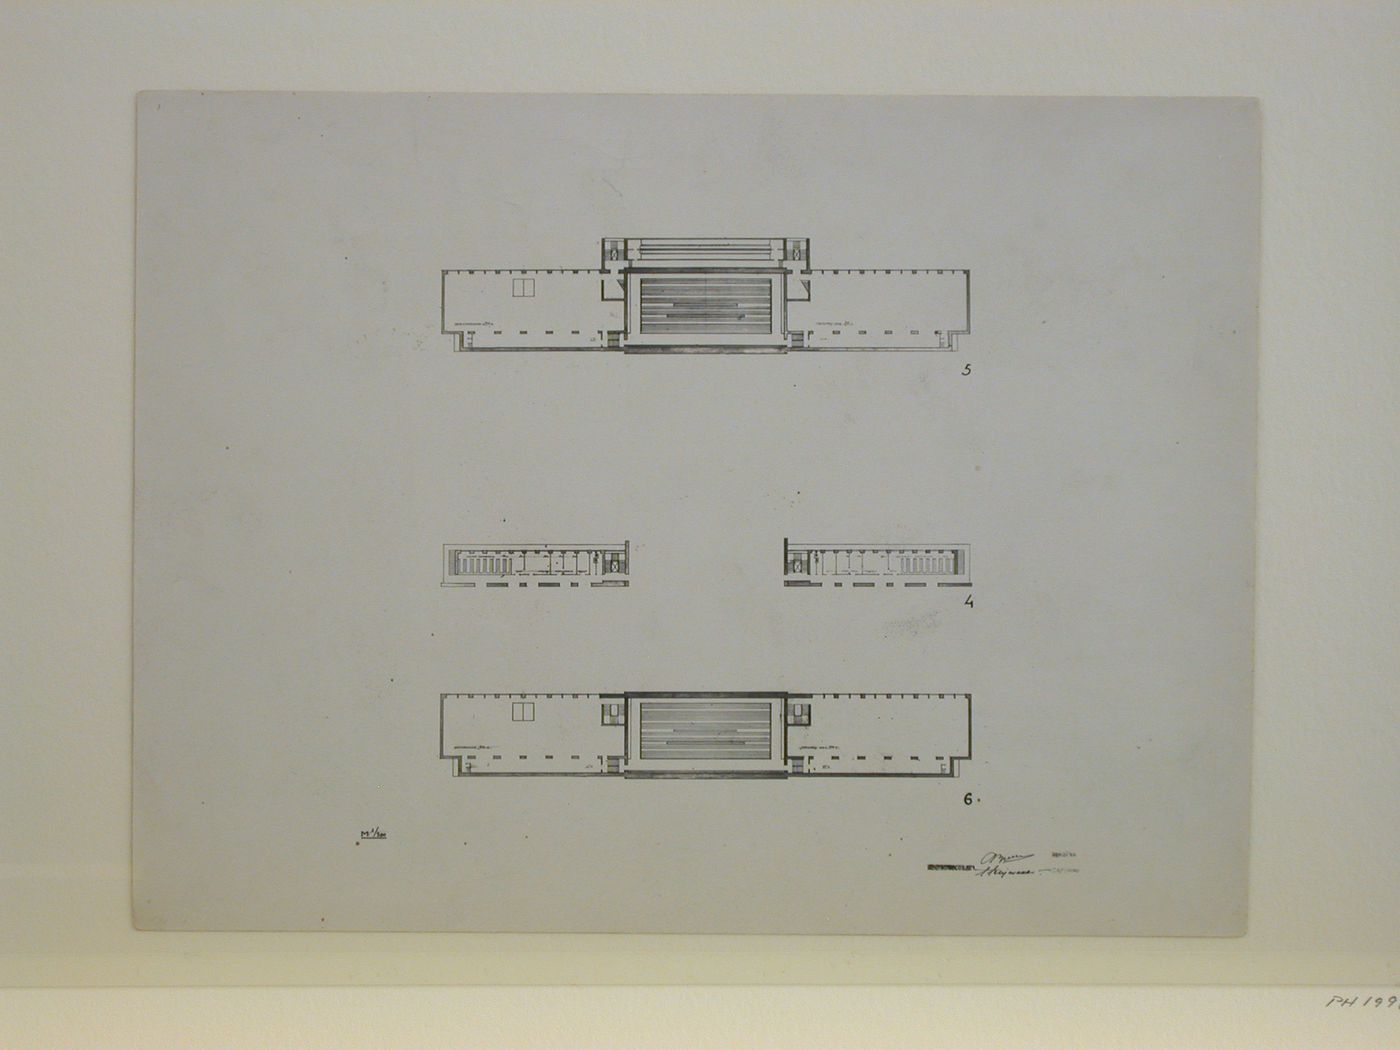 Photograph of plans for a Red Army Theater, Moscow